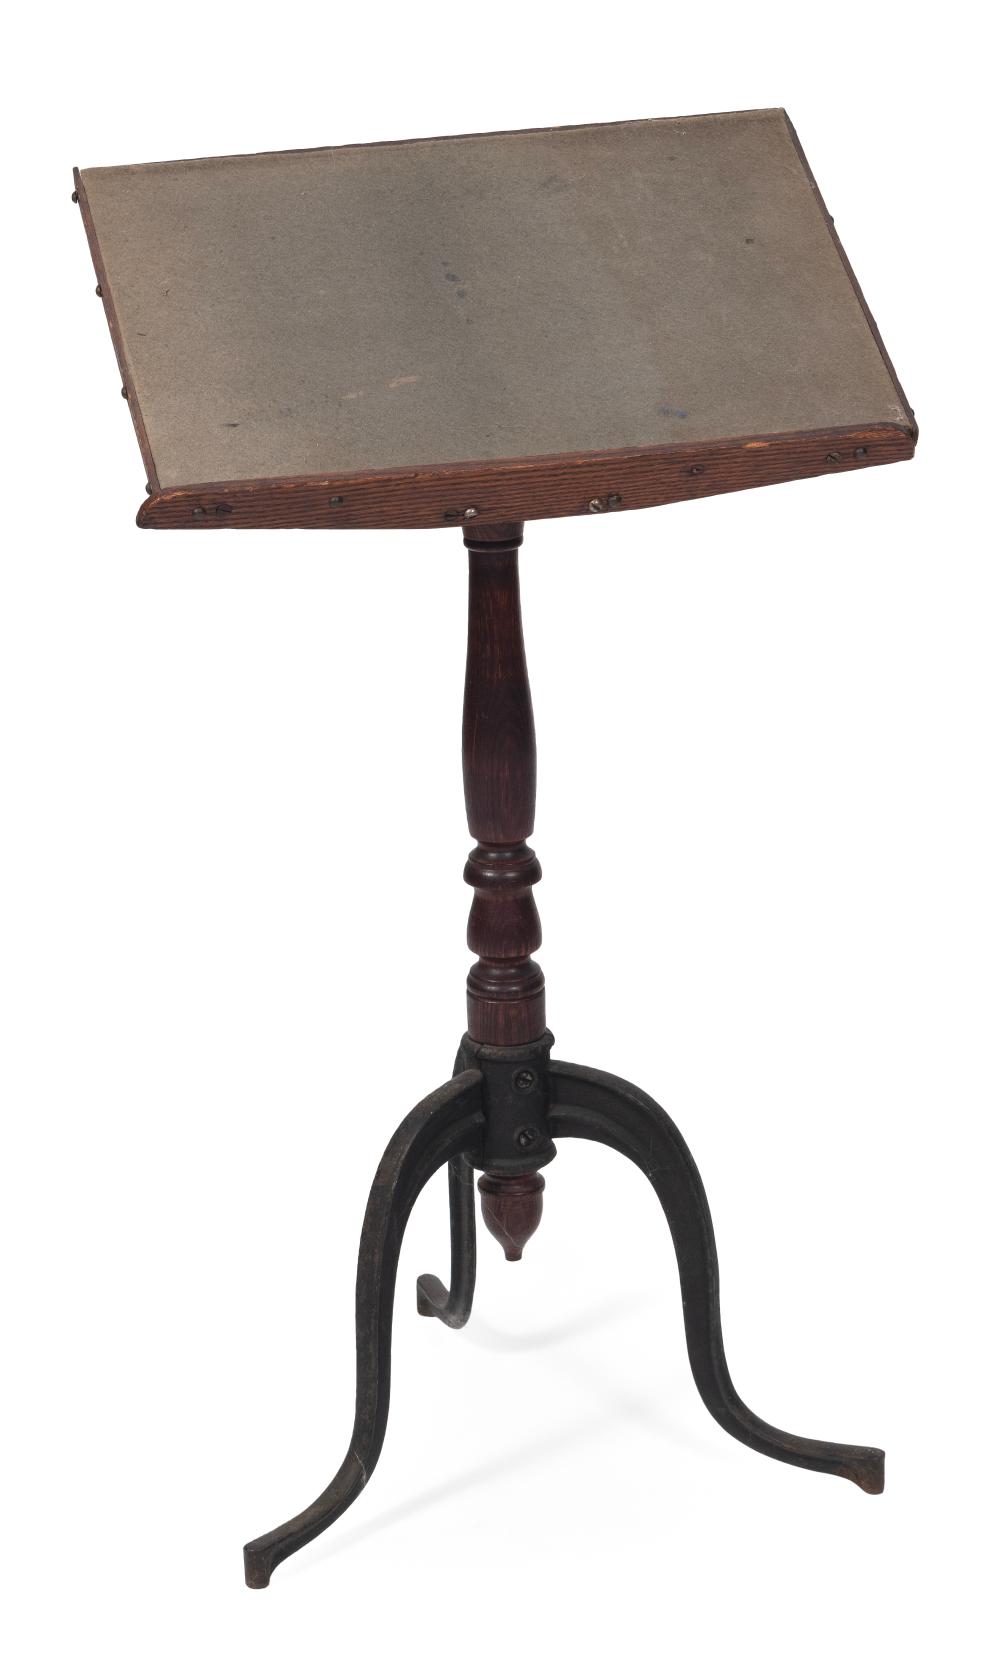 IRON AND WOOD BOOK STAND LATE 19TH 2f10ab